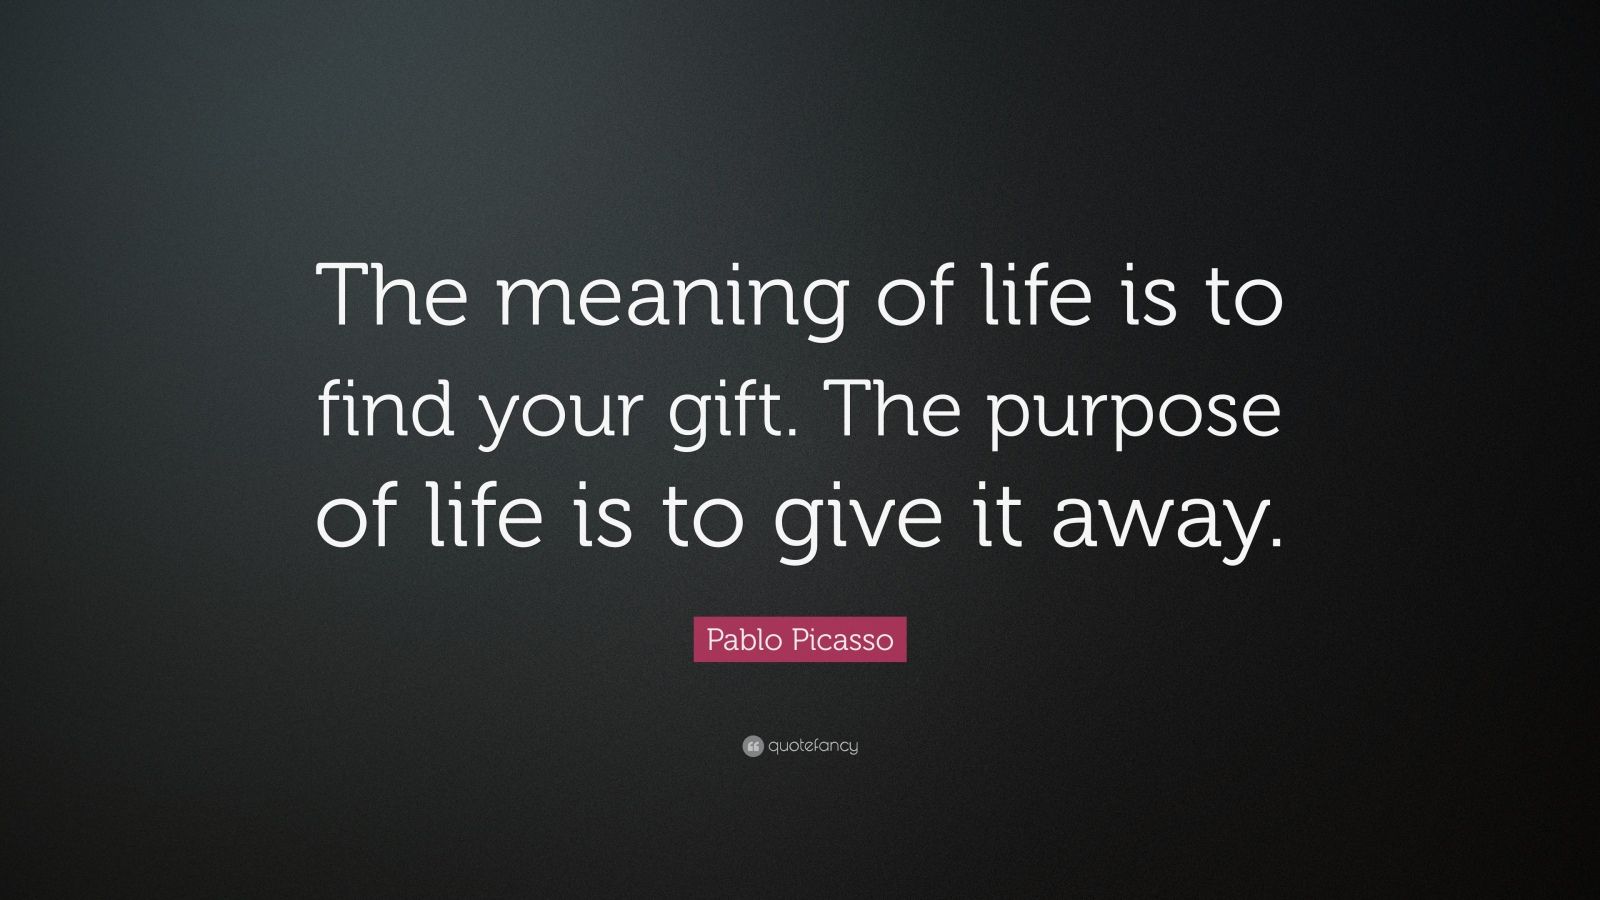 Pablo Picasso Quote “The meaning of life is to find your